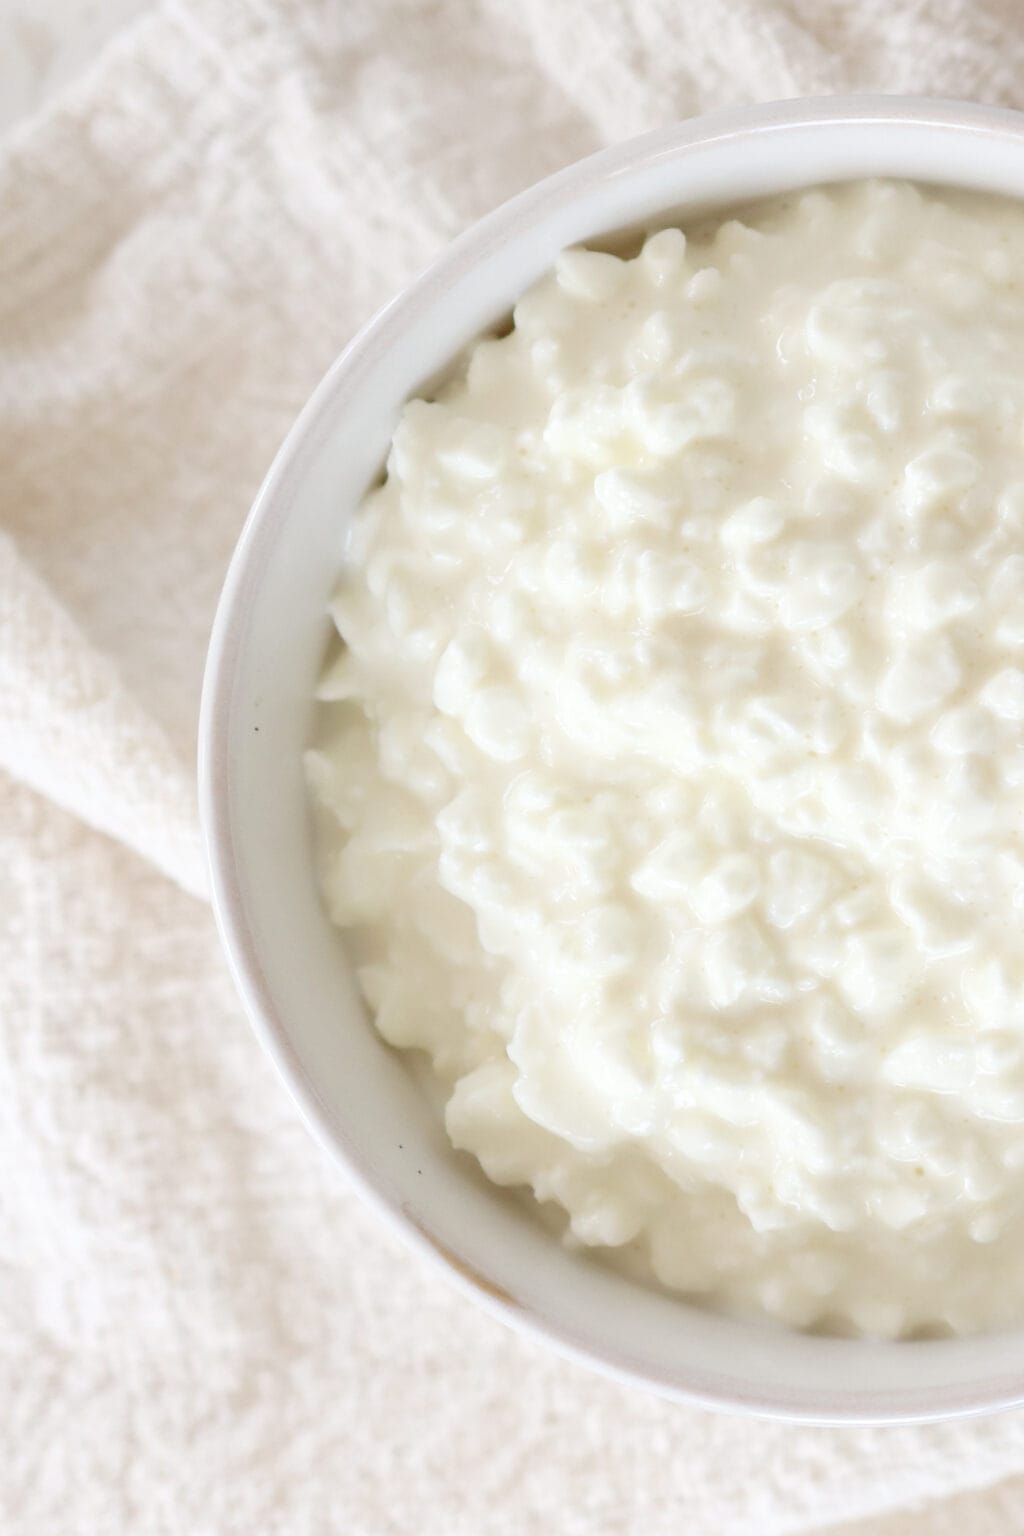 A zoomed in image of a white bowl with cottage cheese inside. The bowl is sitting on a textured dish towel.